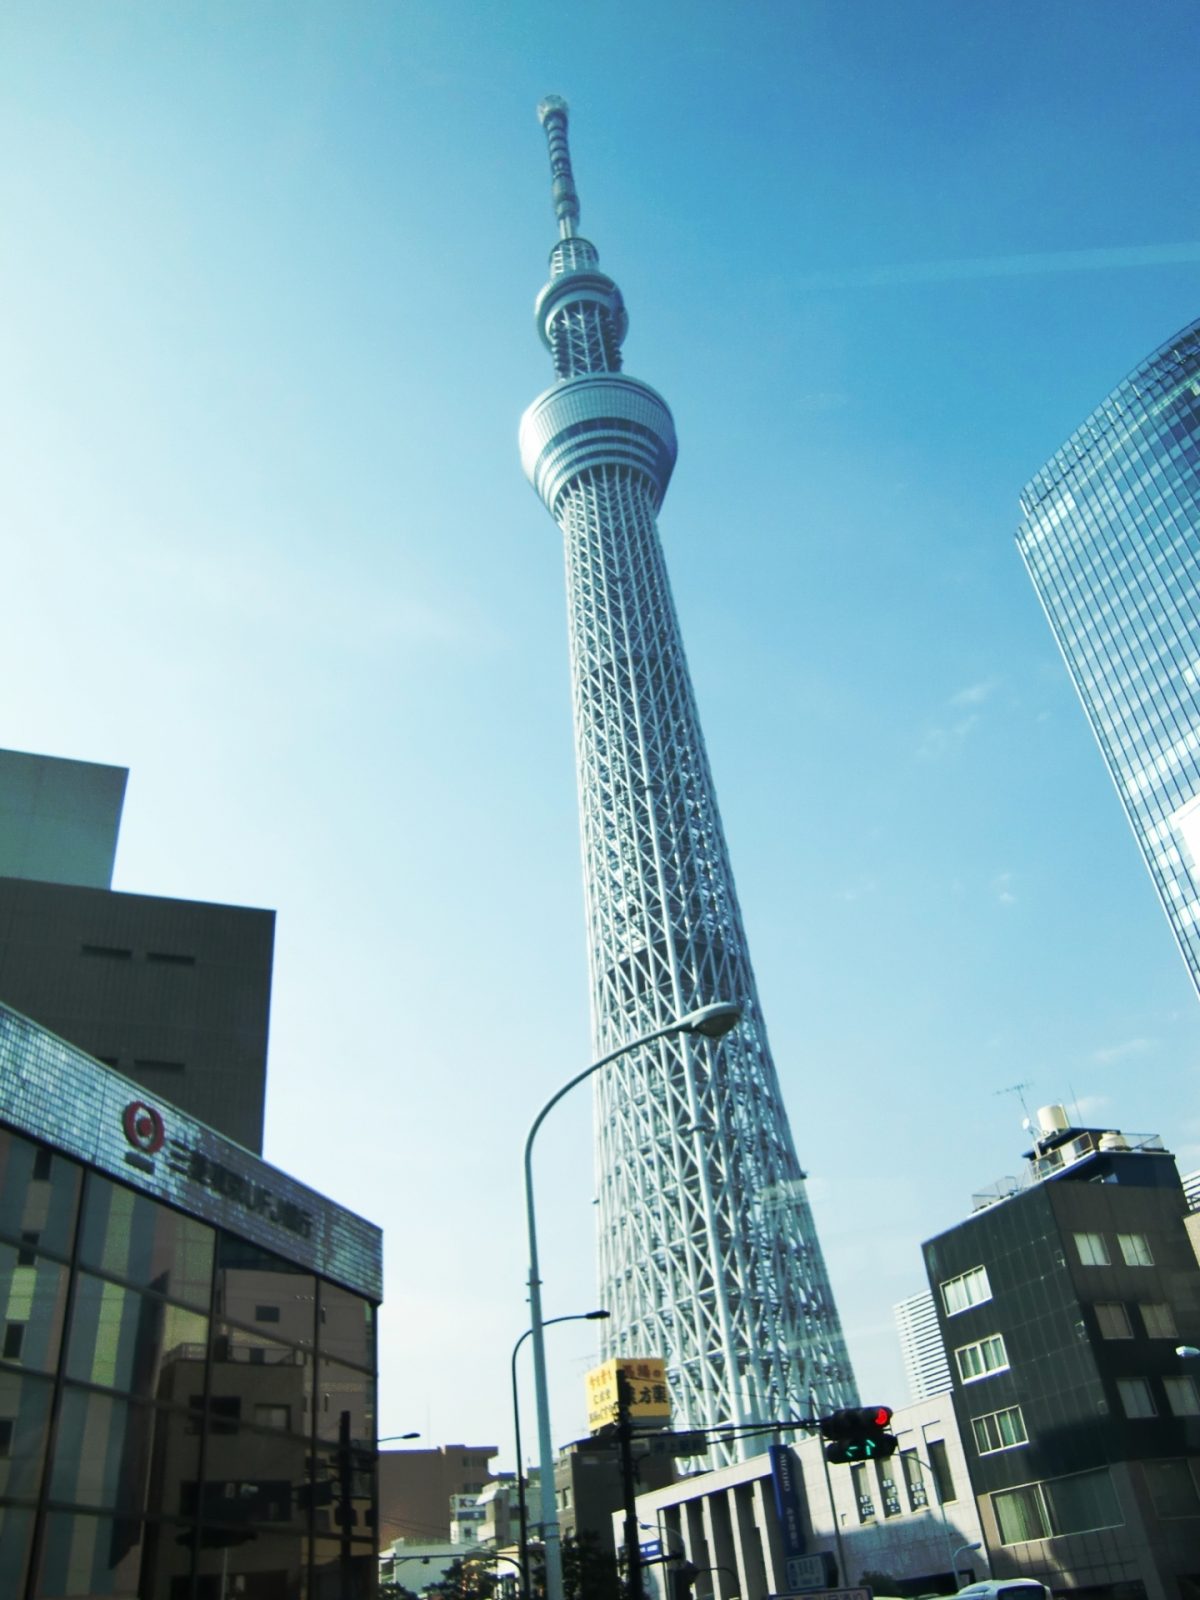 The world's tallest broadcast tower ”TOKYO SKYTREE” | JELCY